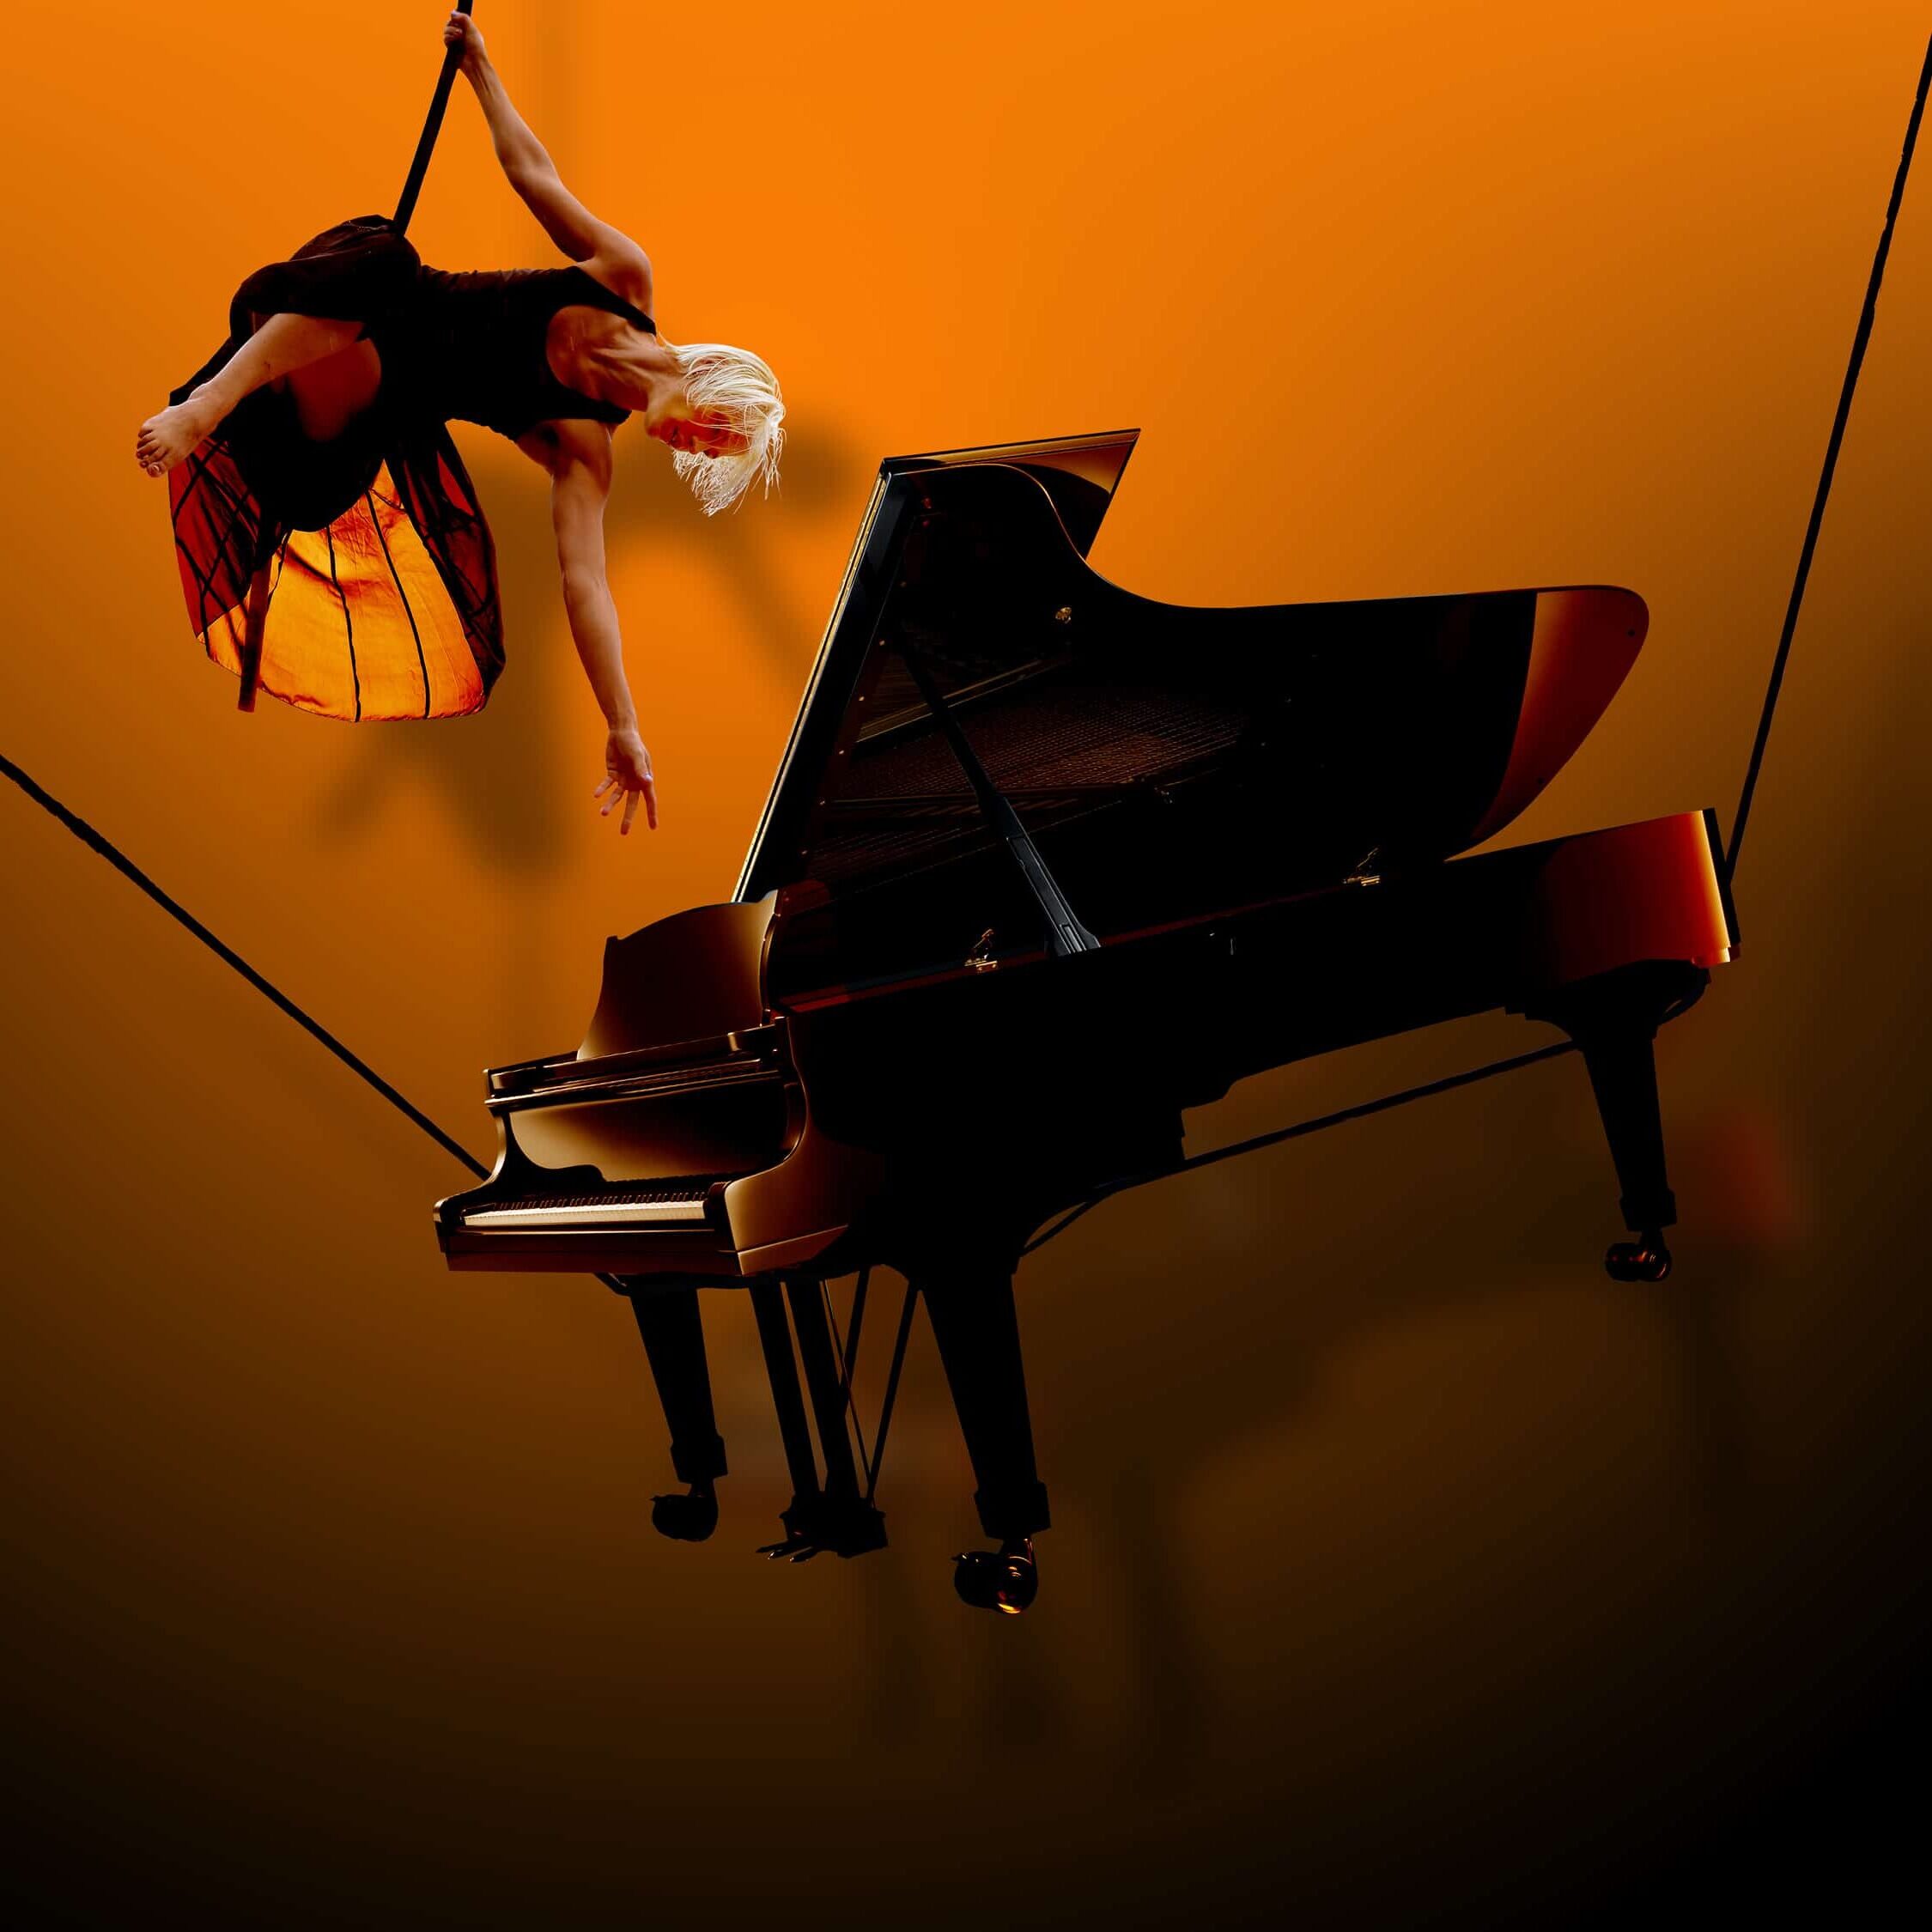 Gould's Wall: A woman suspended in the air reaching towards a piano, also suspended